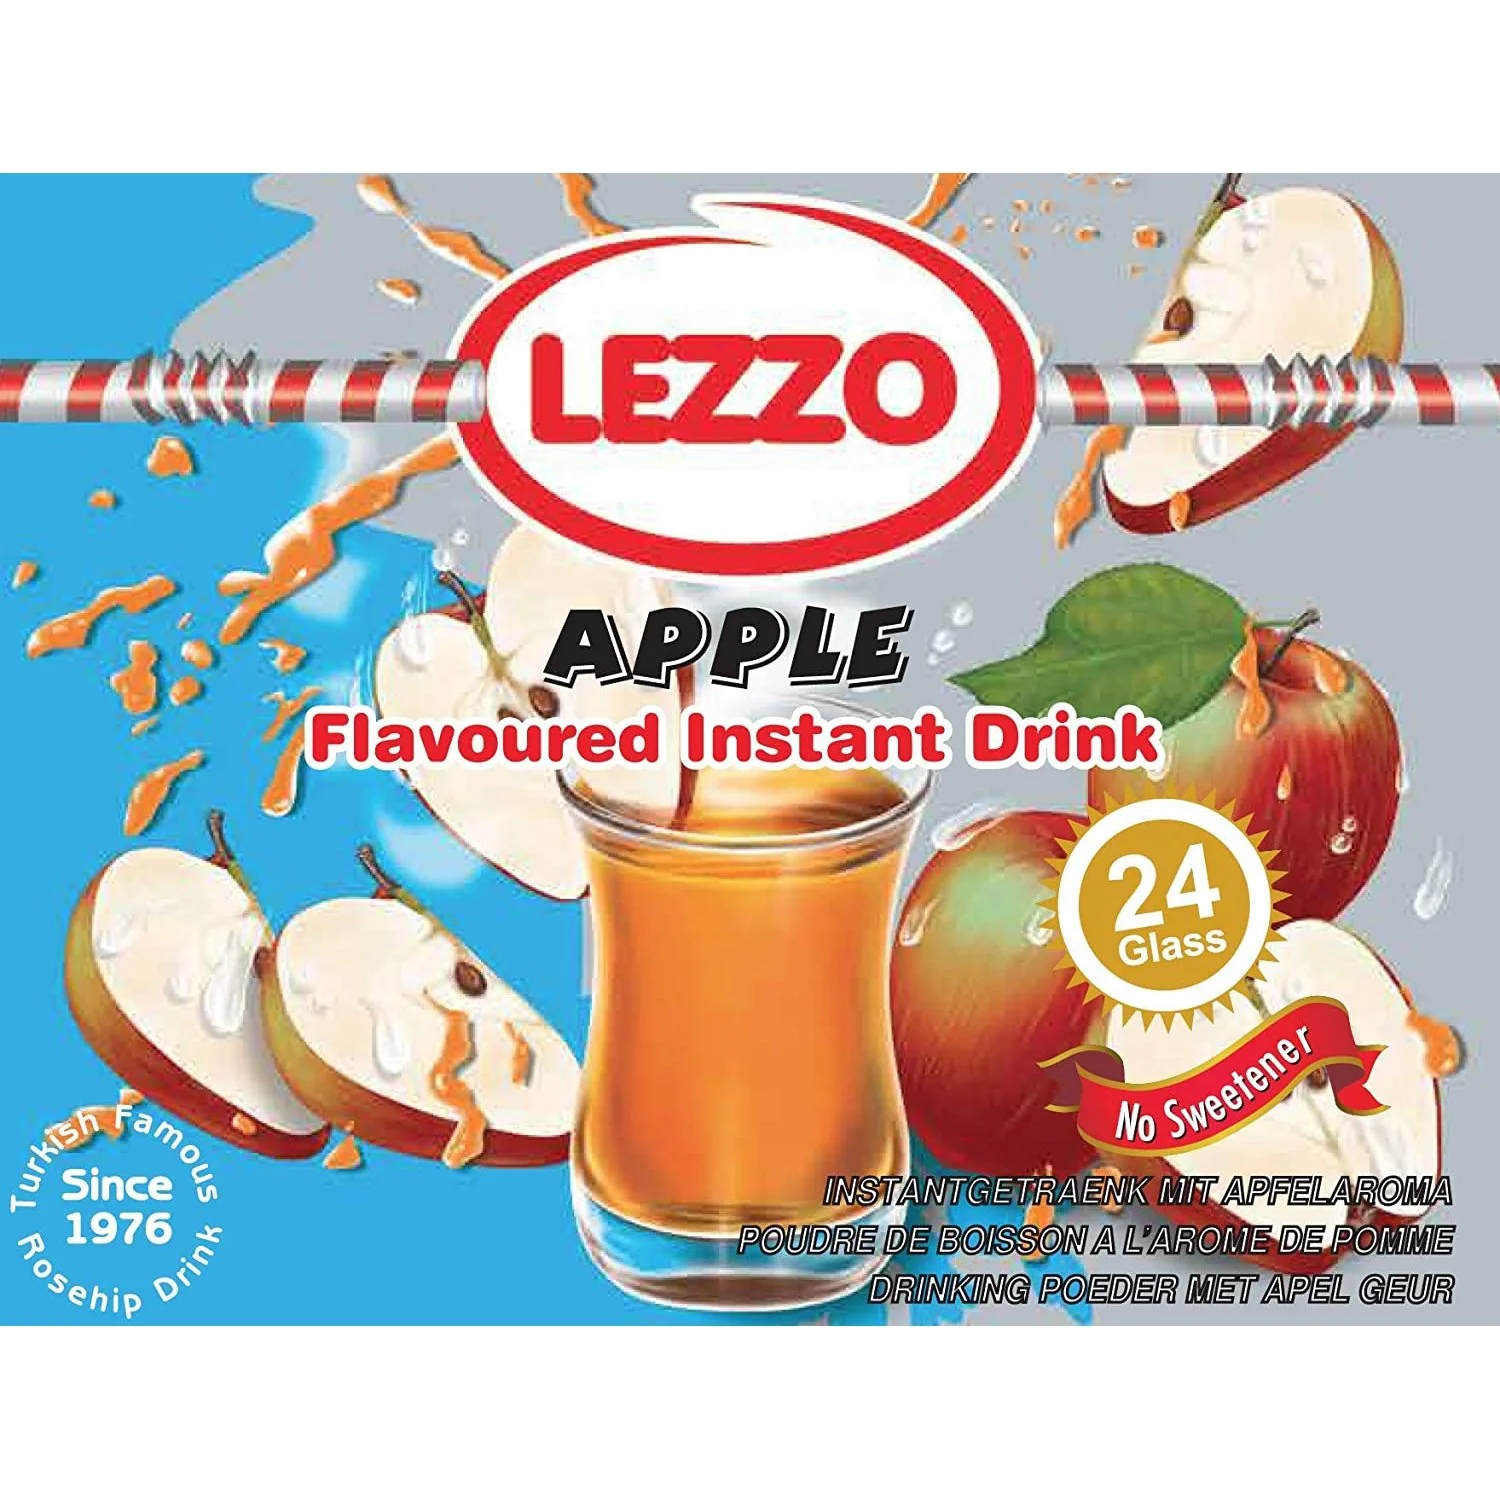 Lezzo Turkish Apple Flavored Instant Drink 600g